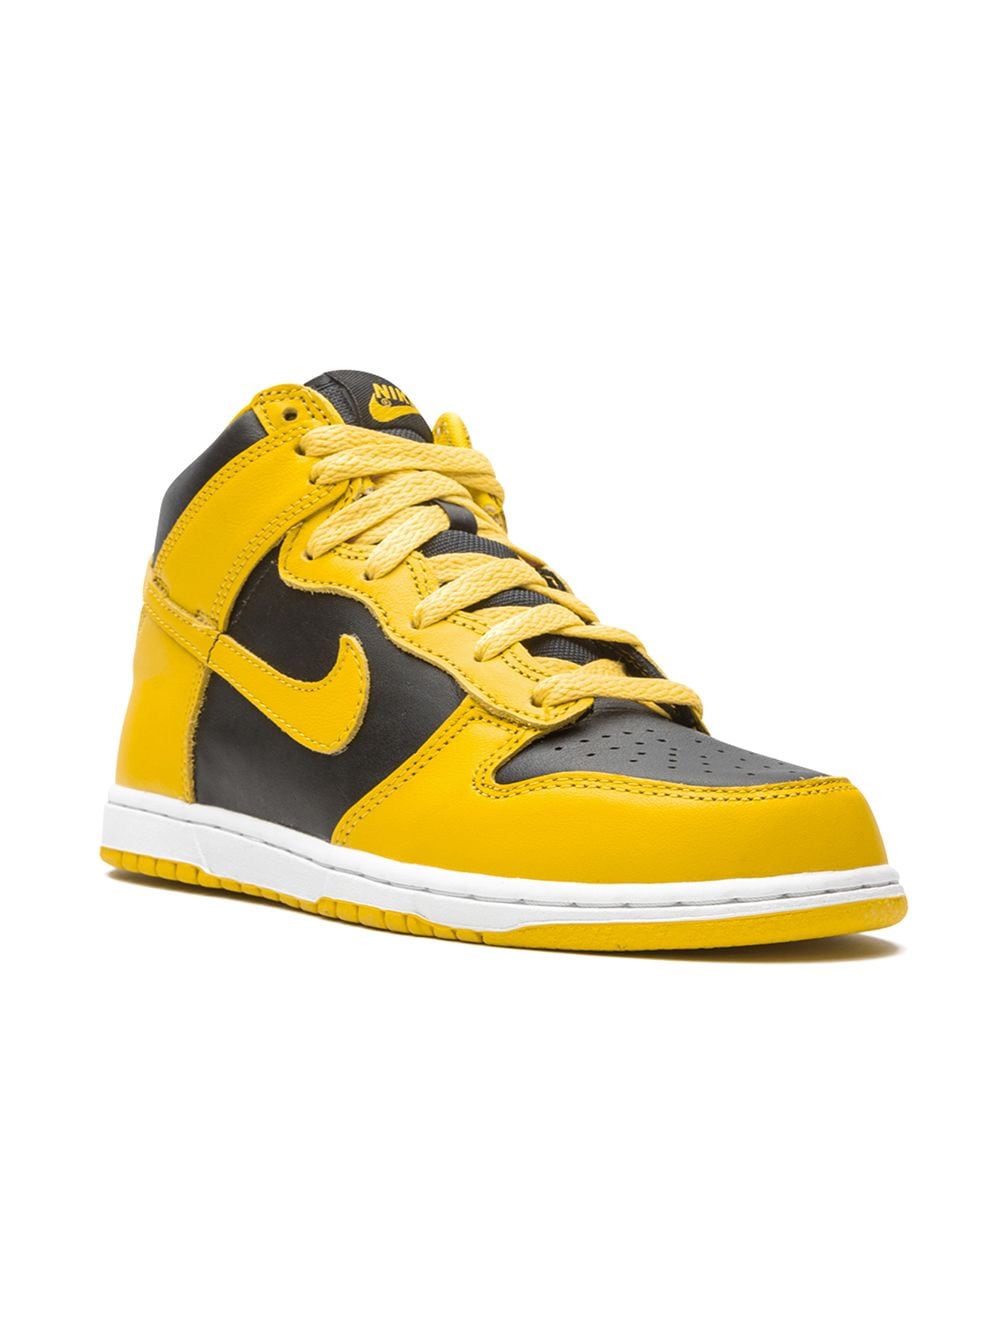 Image 1 of Nike Kids Dunk High SP "Varsity Maize" sneakers